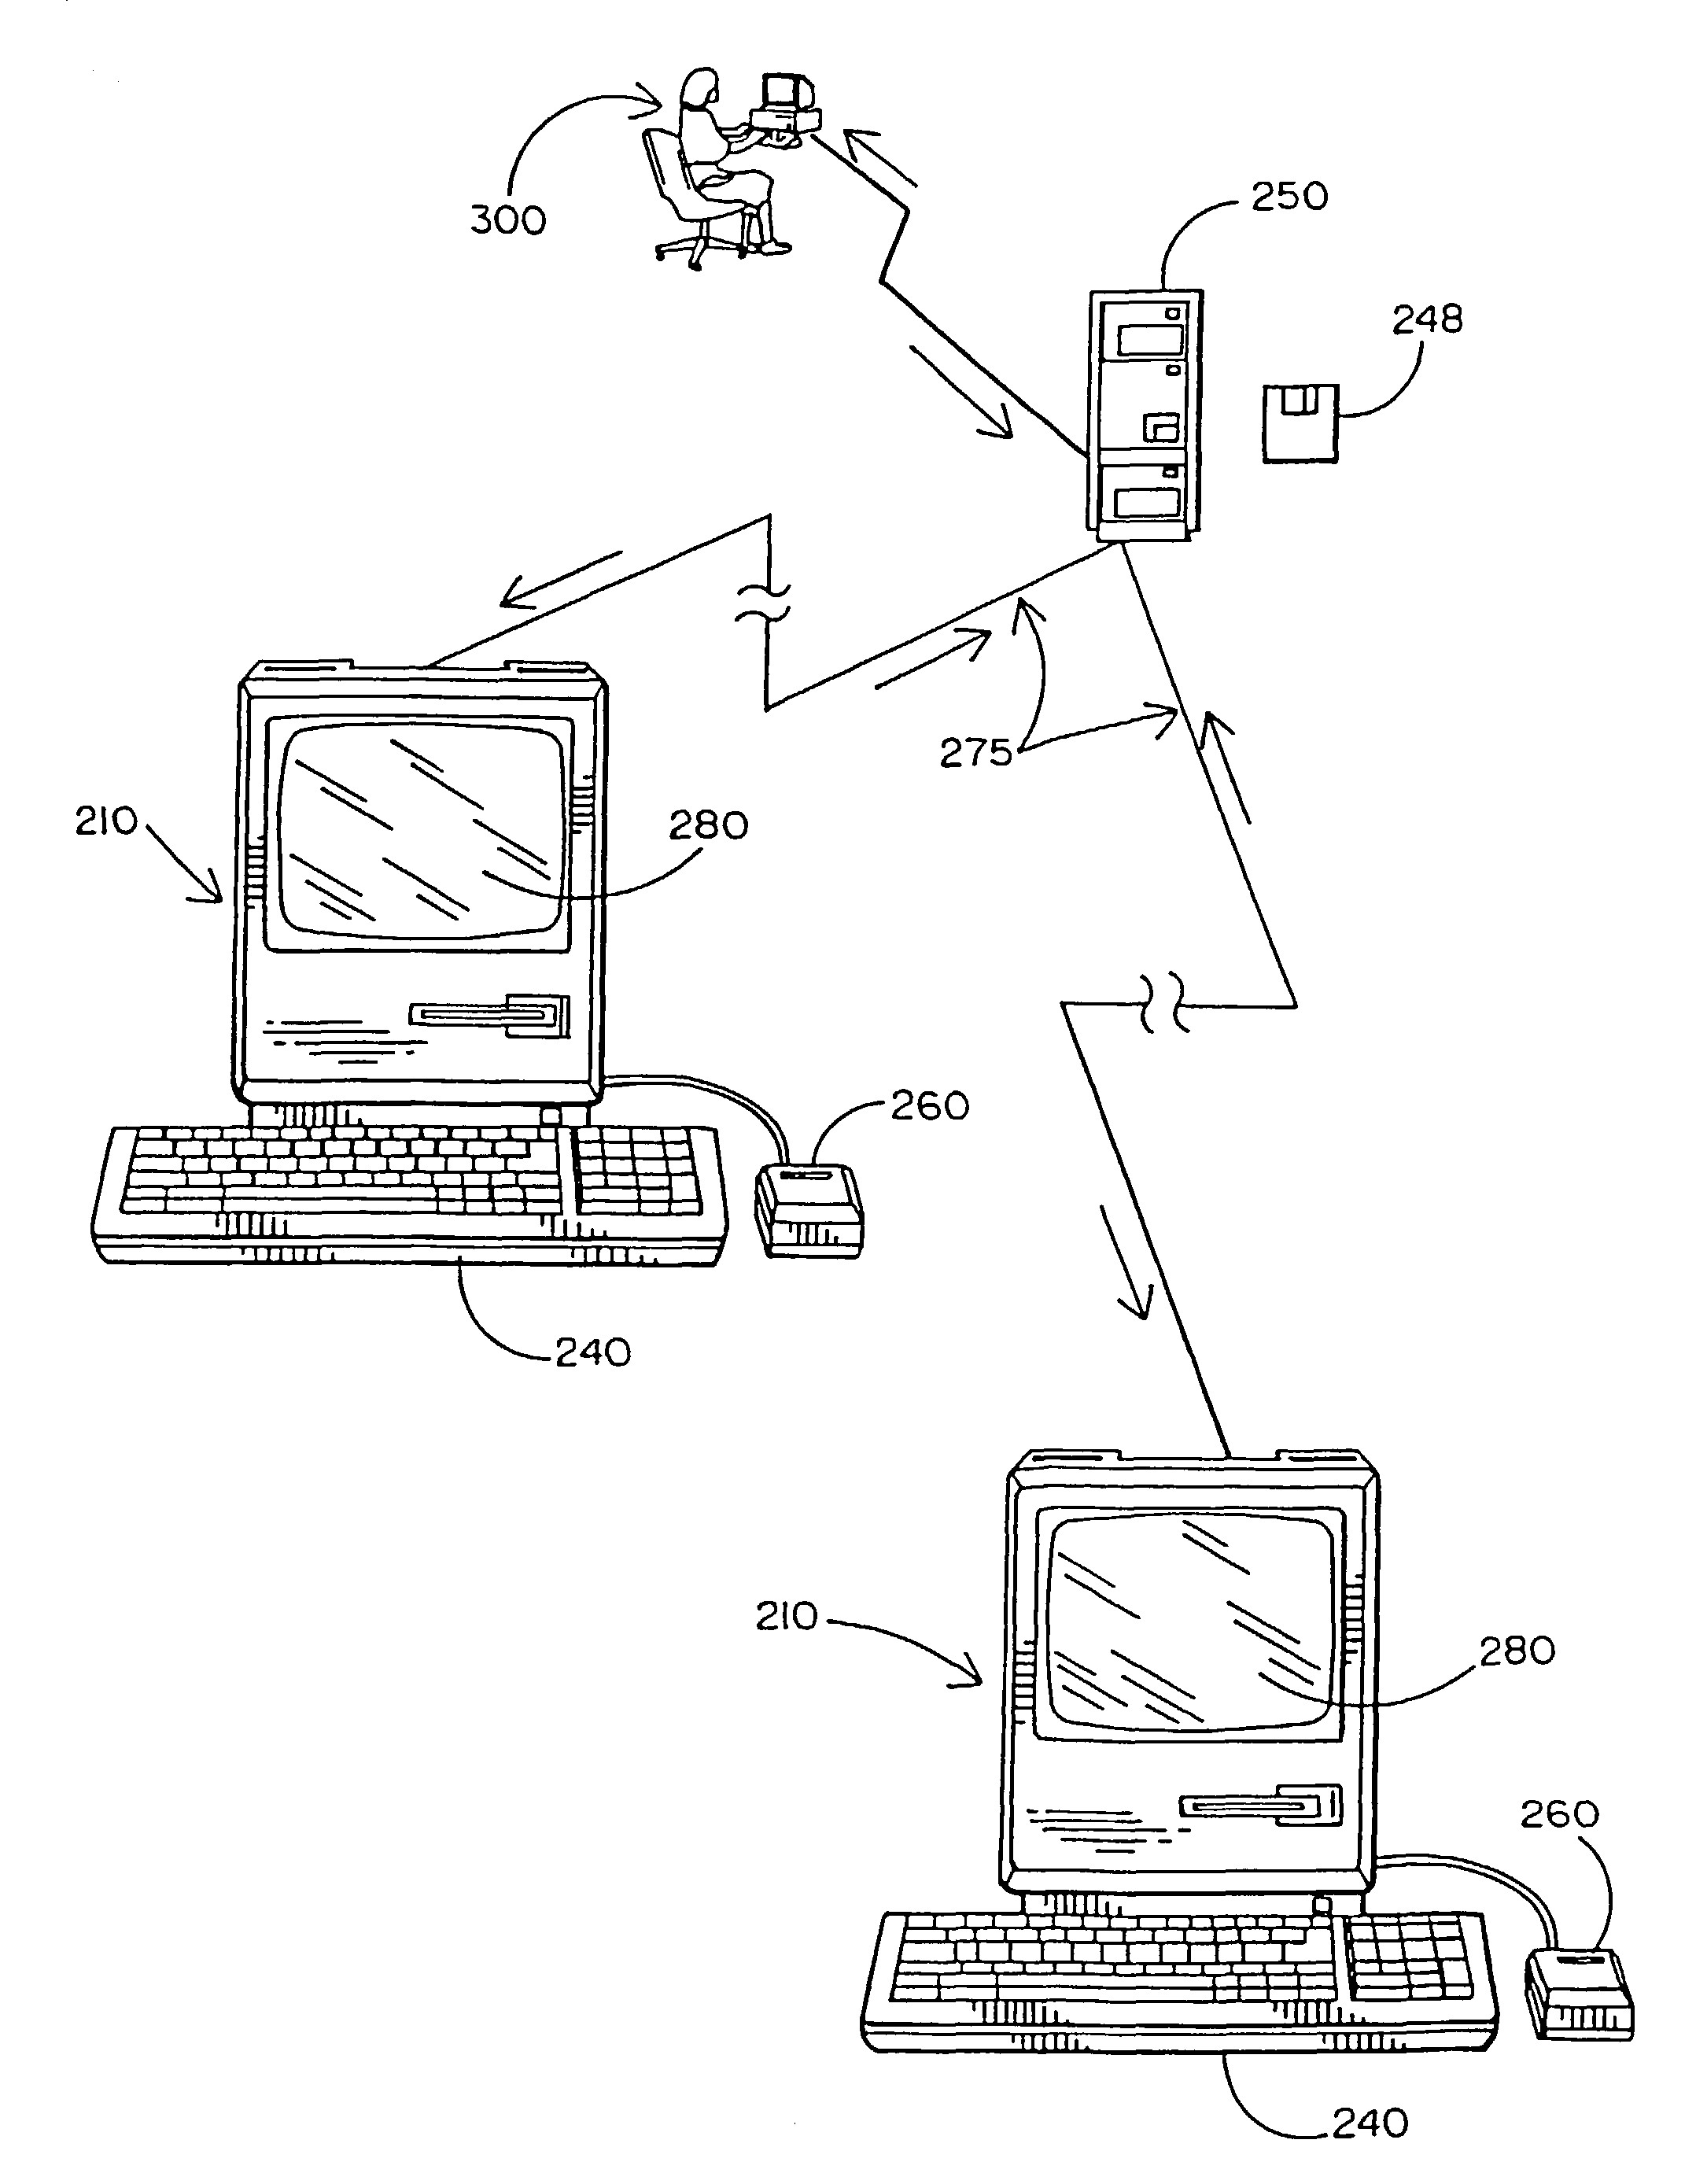 Method and system for providing simultaneous on-line auctions